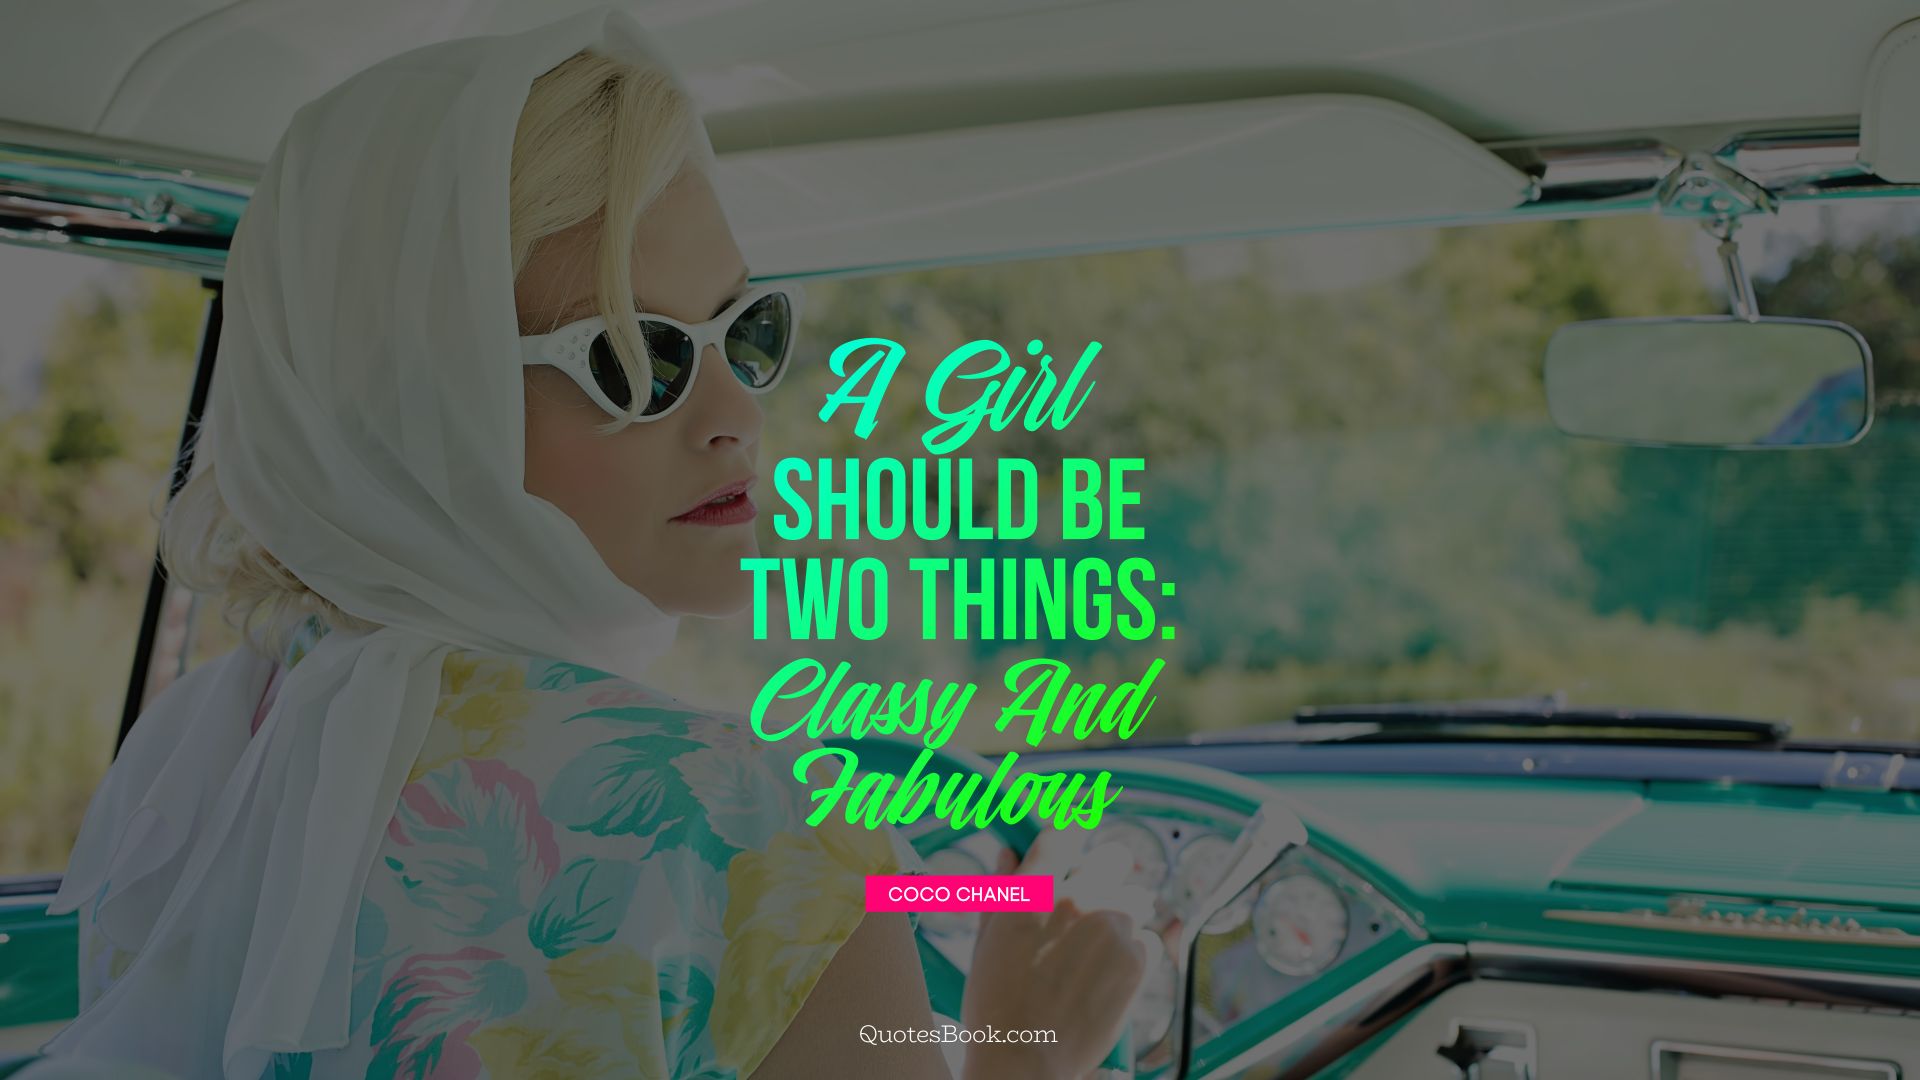 A girl should be two things: classy and fabulous. - Quote by Coco Chanel